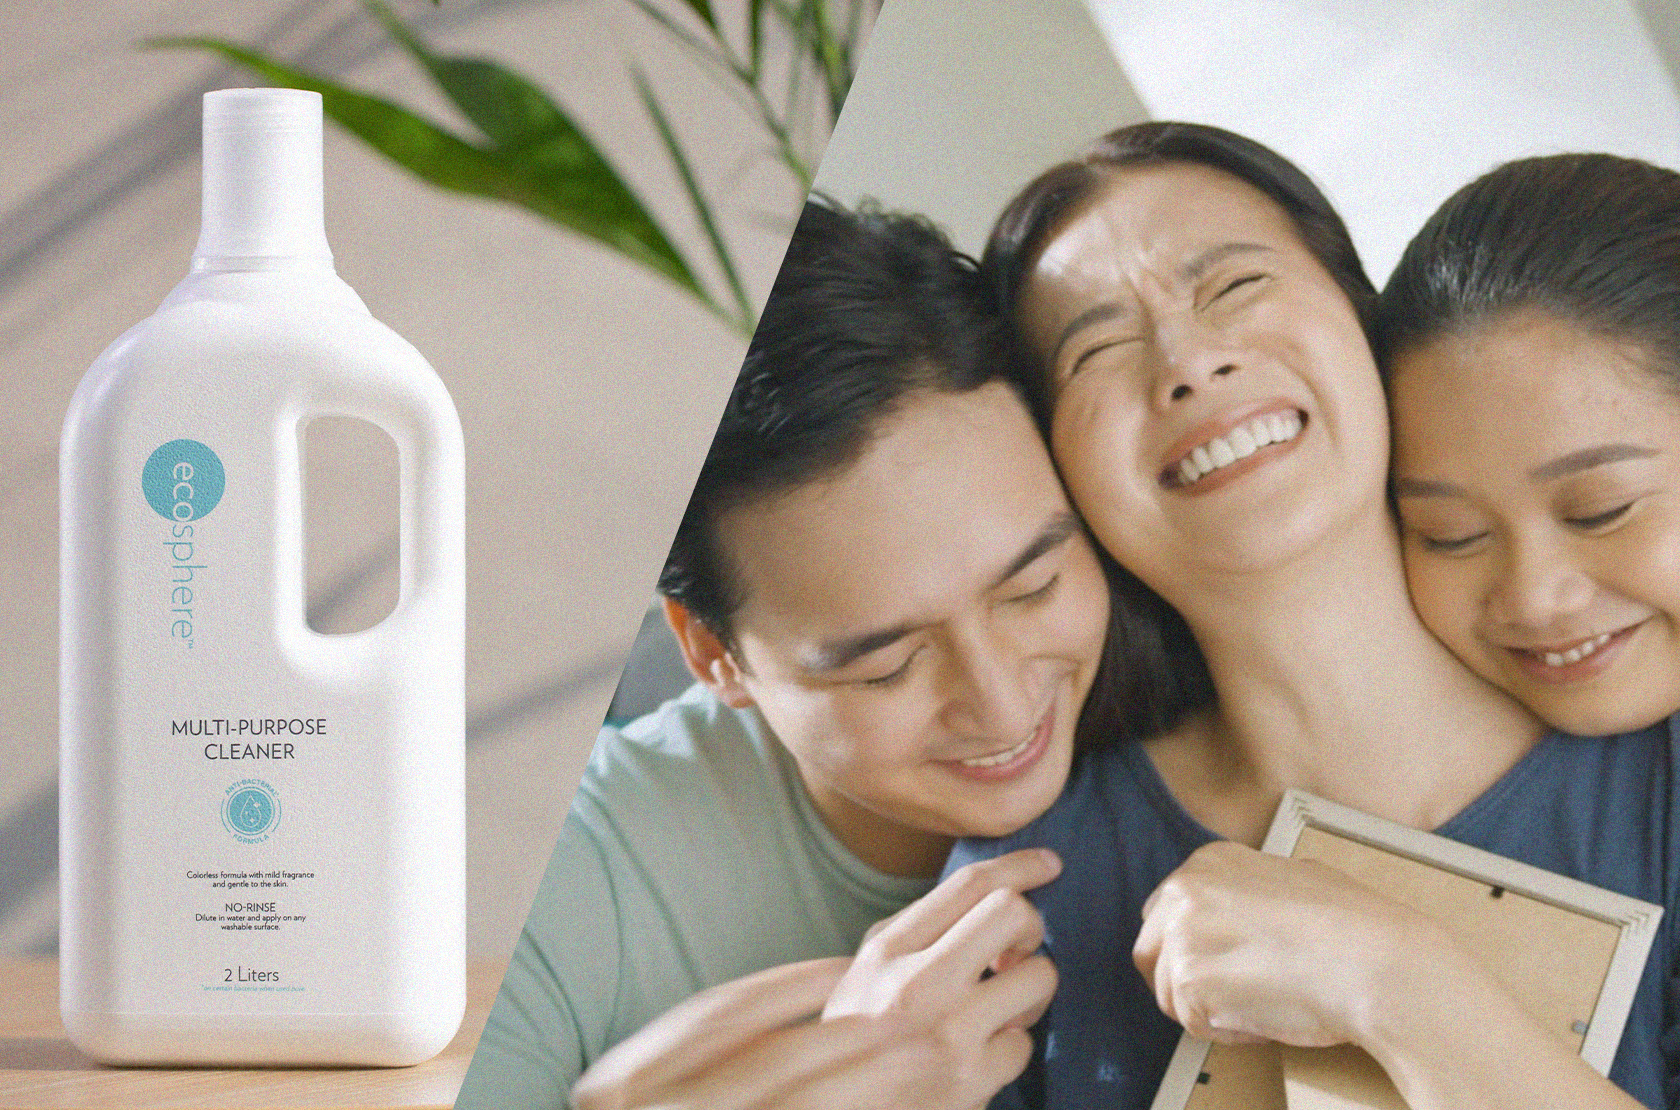 THIS PRODUCT FROM NUSKIN IS THE ANSWER TO GENTLE YET EFFECTIVE CLEANING NEEDS AT HOME 2